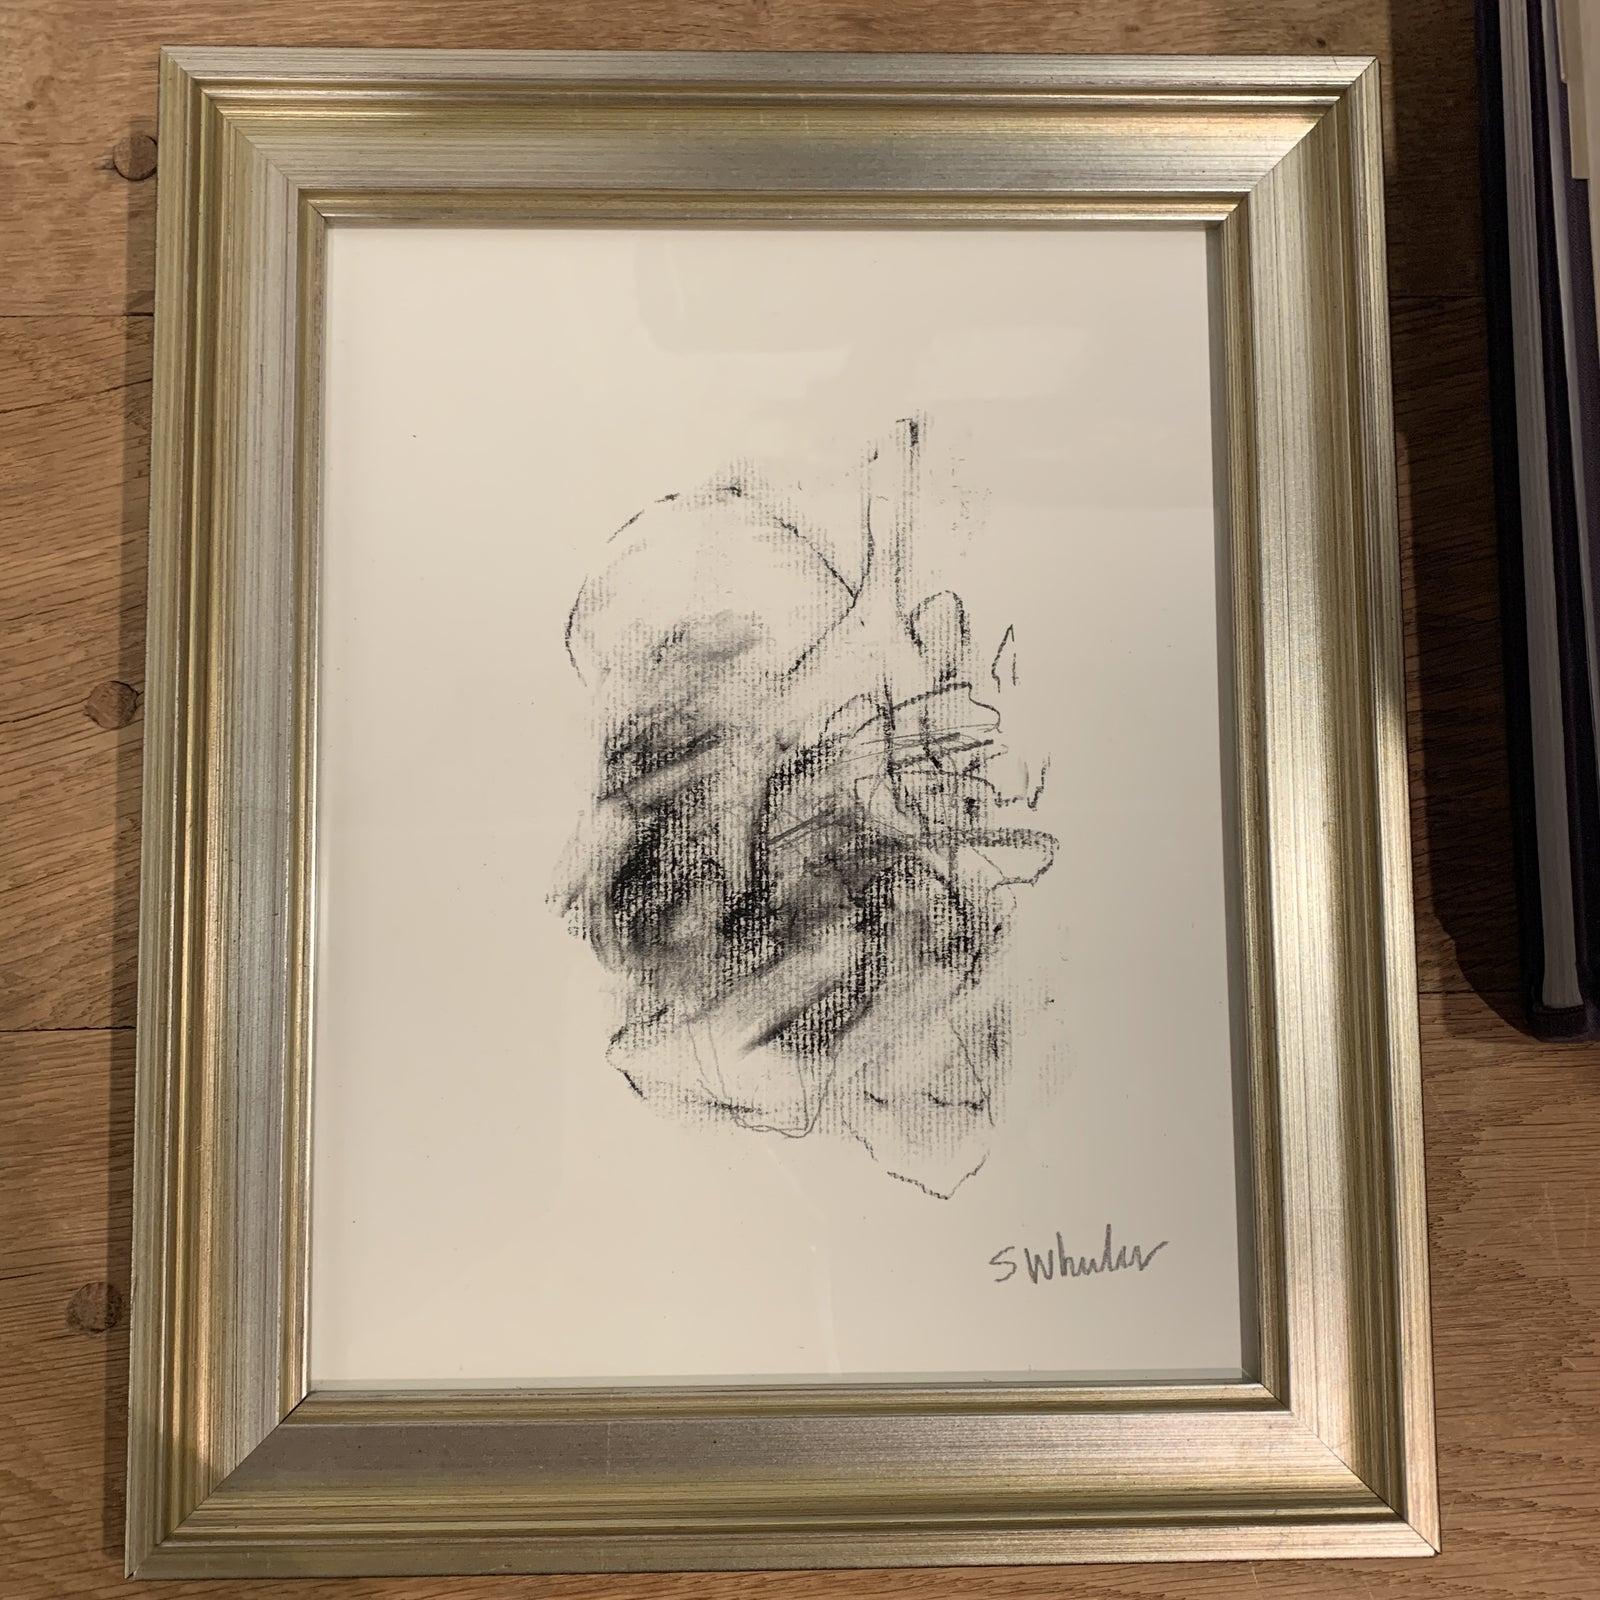 Framed Mini Charcoal  - Painting by Unknown